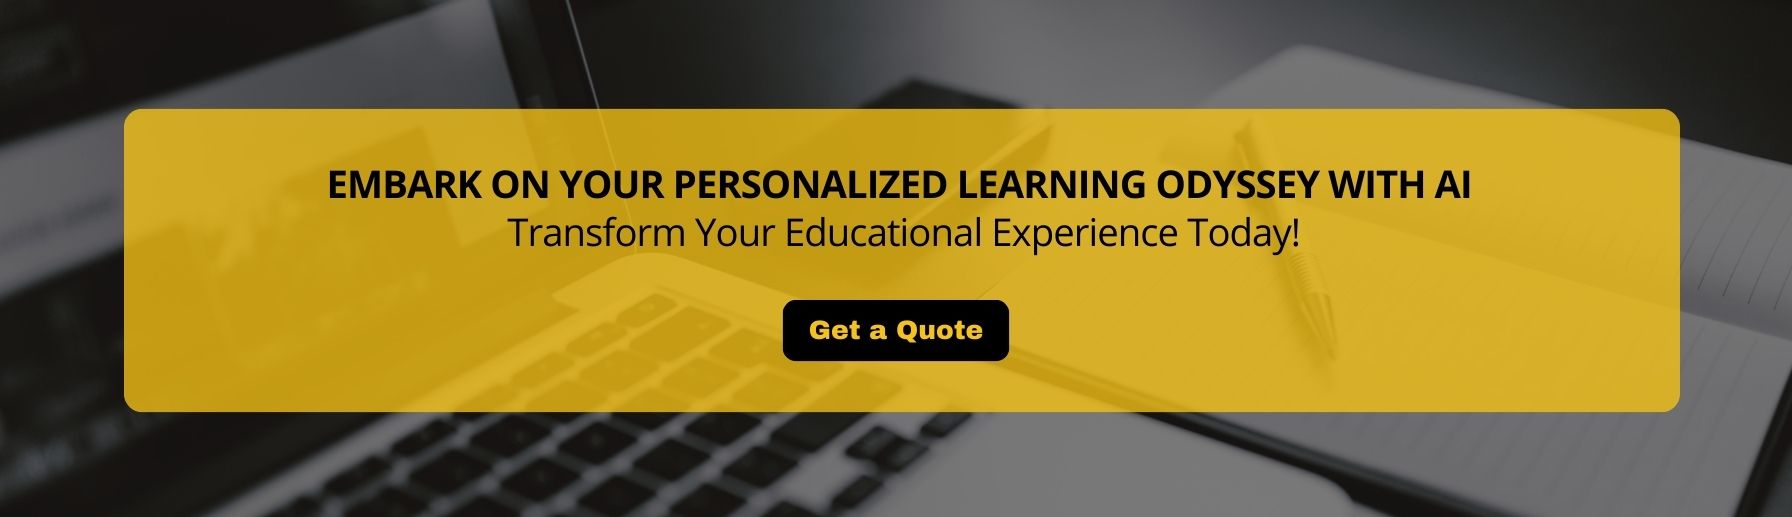 Personalized Learning How AI Is Shaping the Future of Education CTA